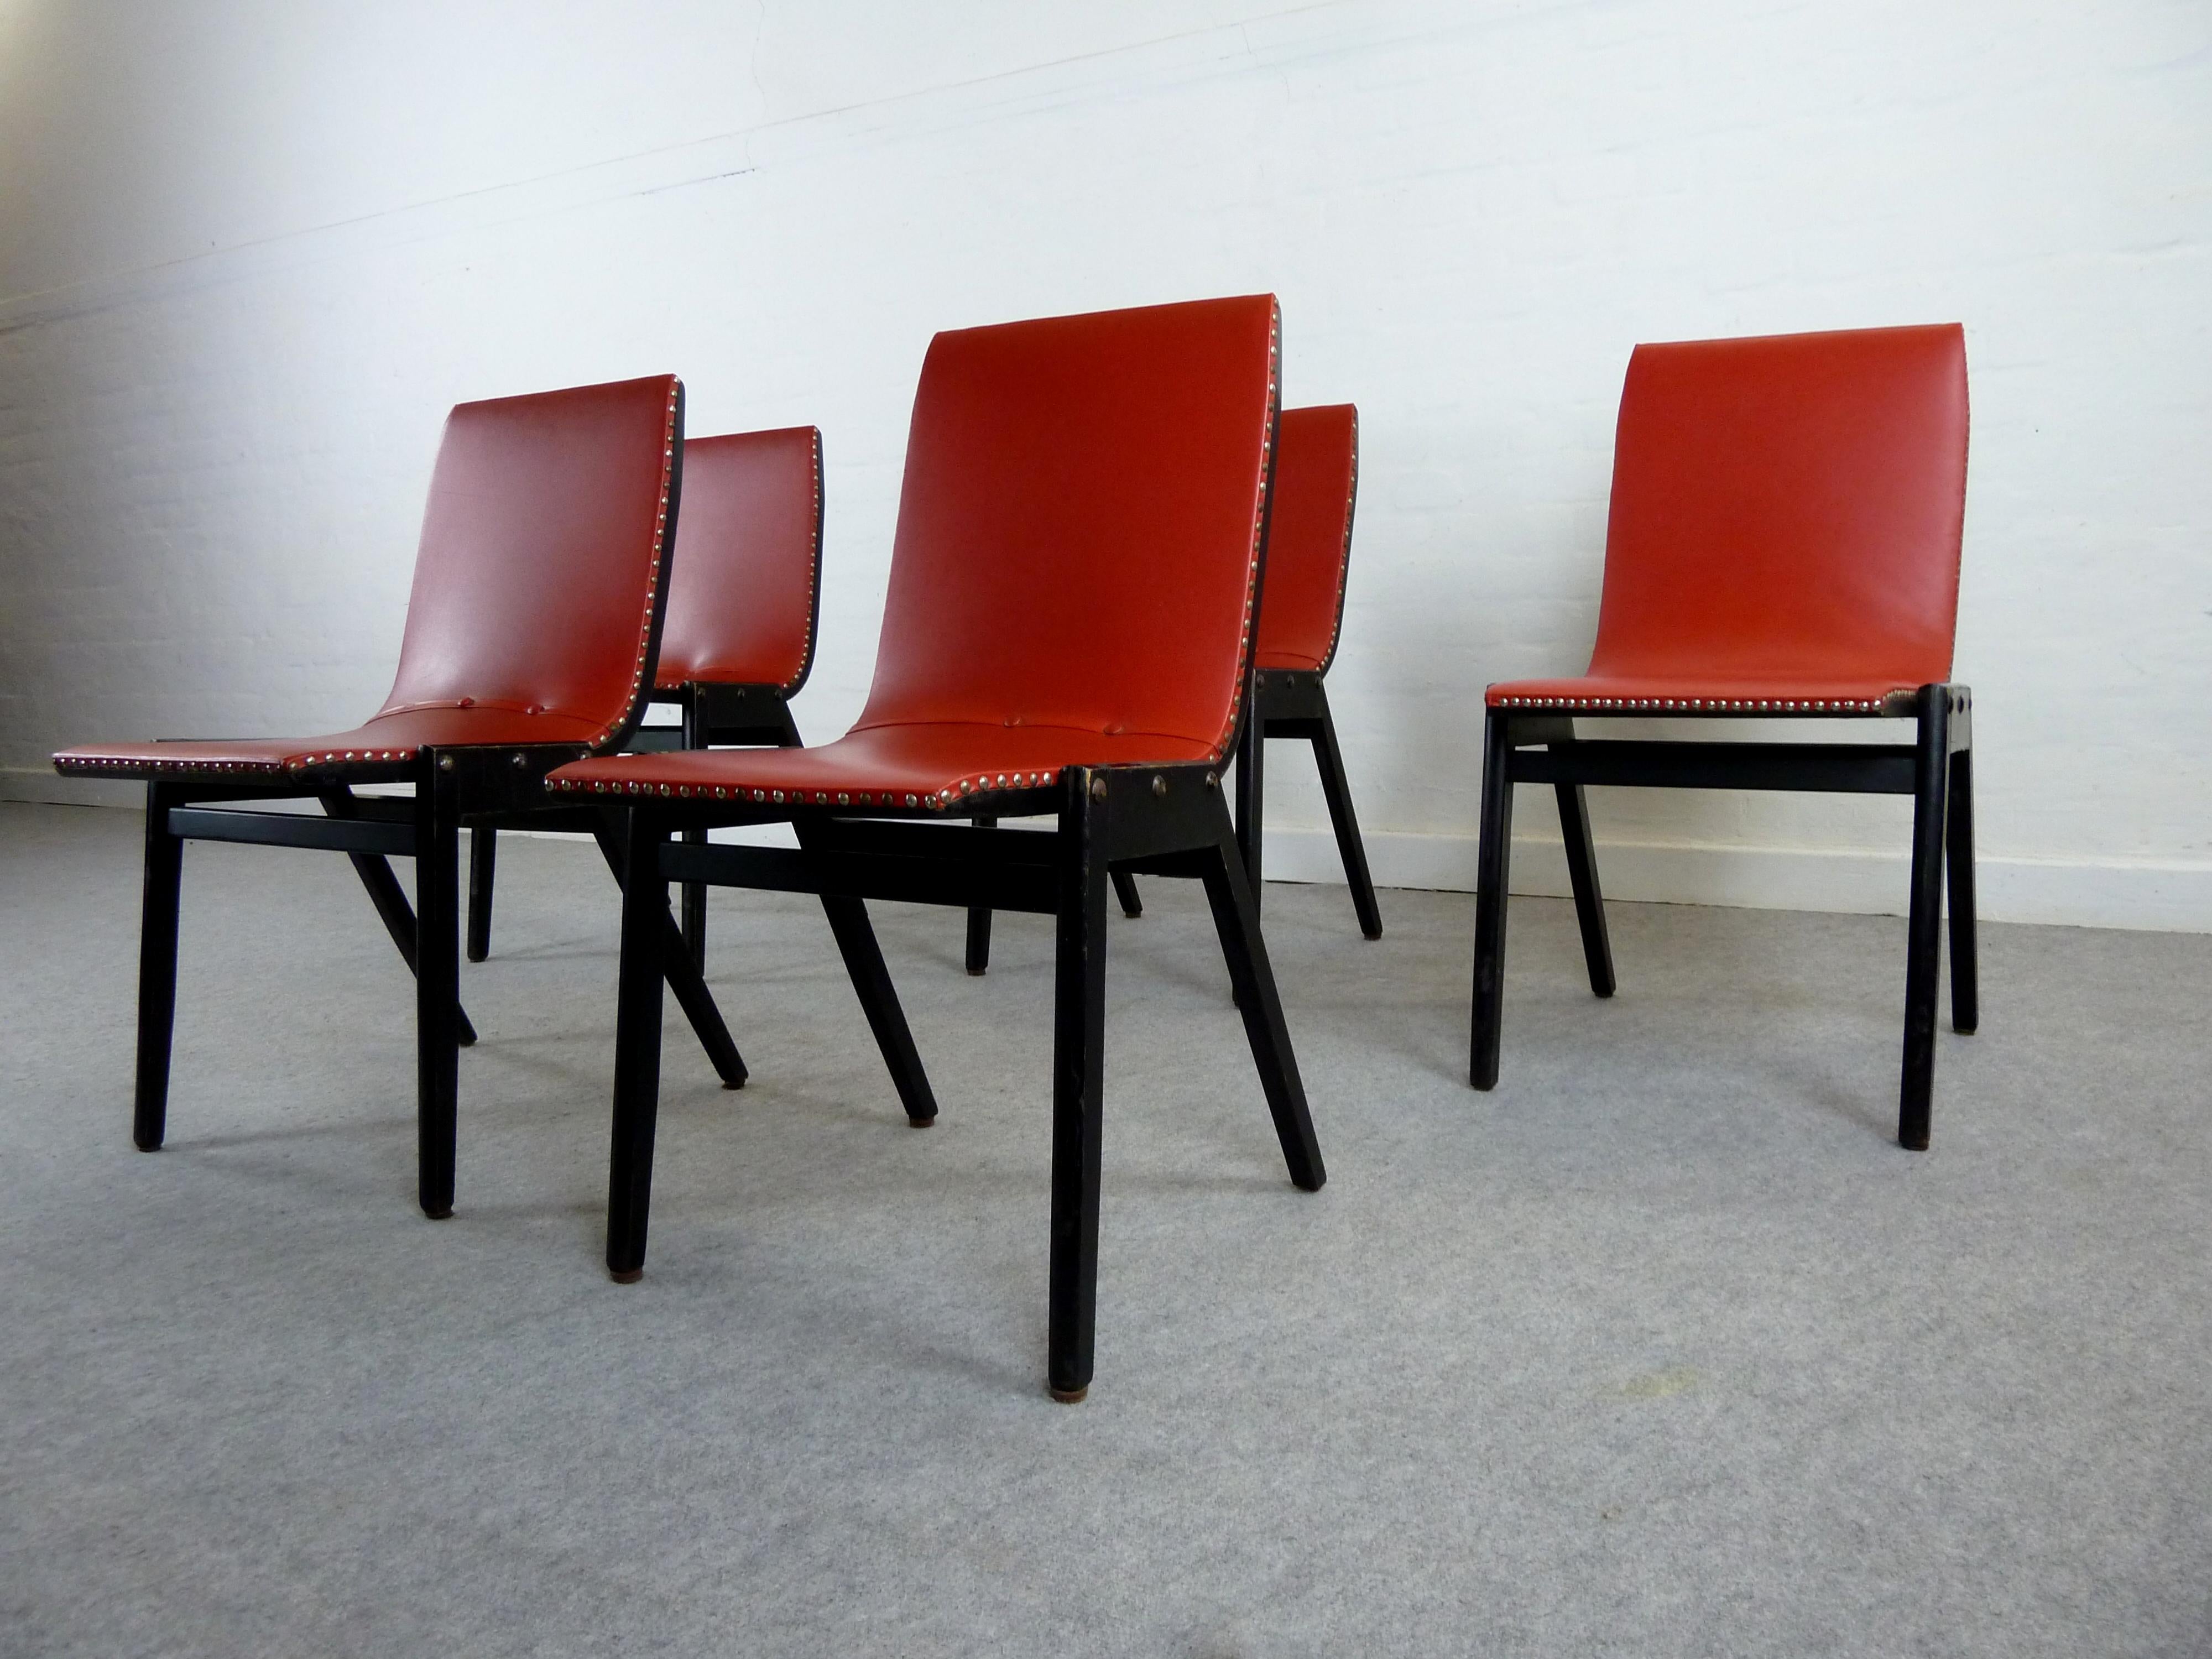 A rare set of 5 chairs from Austrian architect Roland Rainer designed for the Vienna City Hall.
Not so often seen version original upholstered in red artificial leather from the 1950s.
Well used but still in stabile condition.